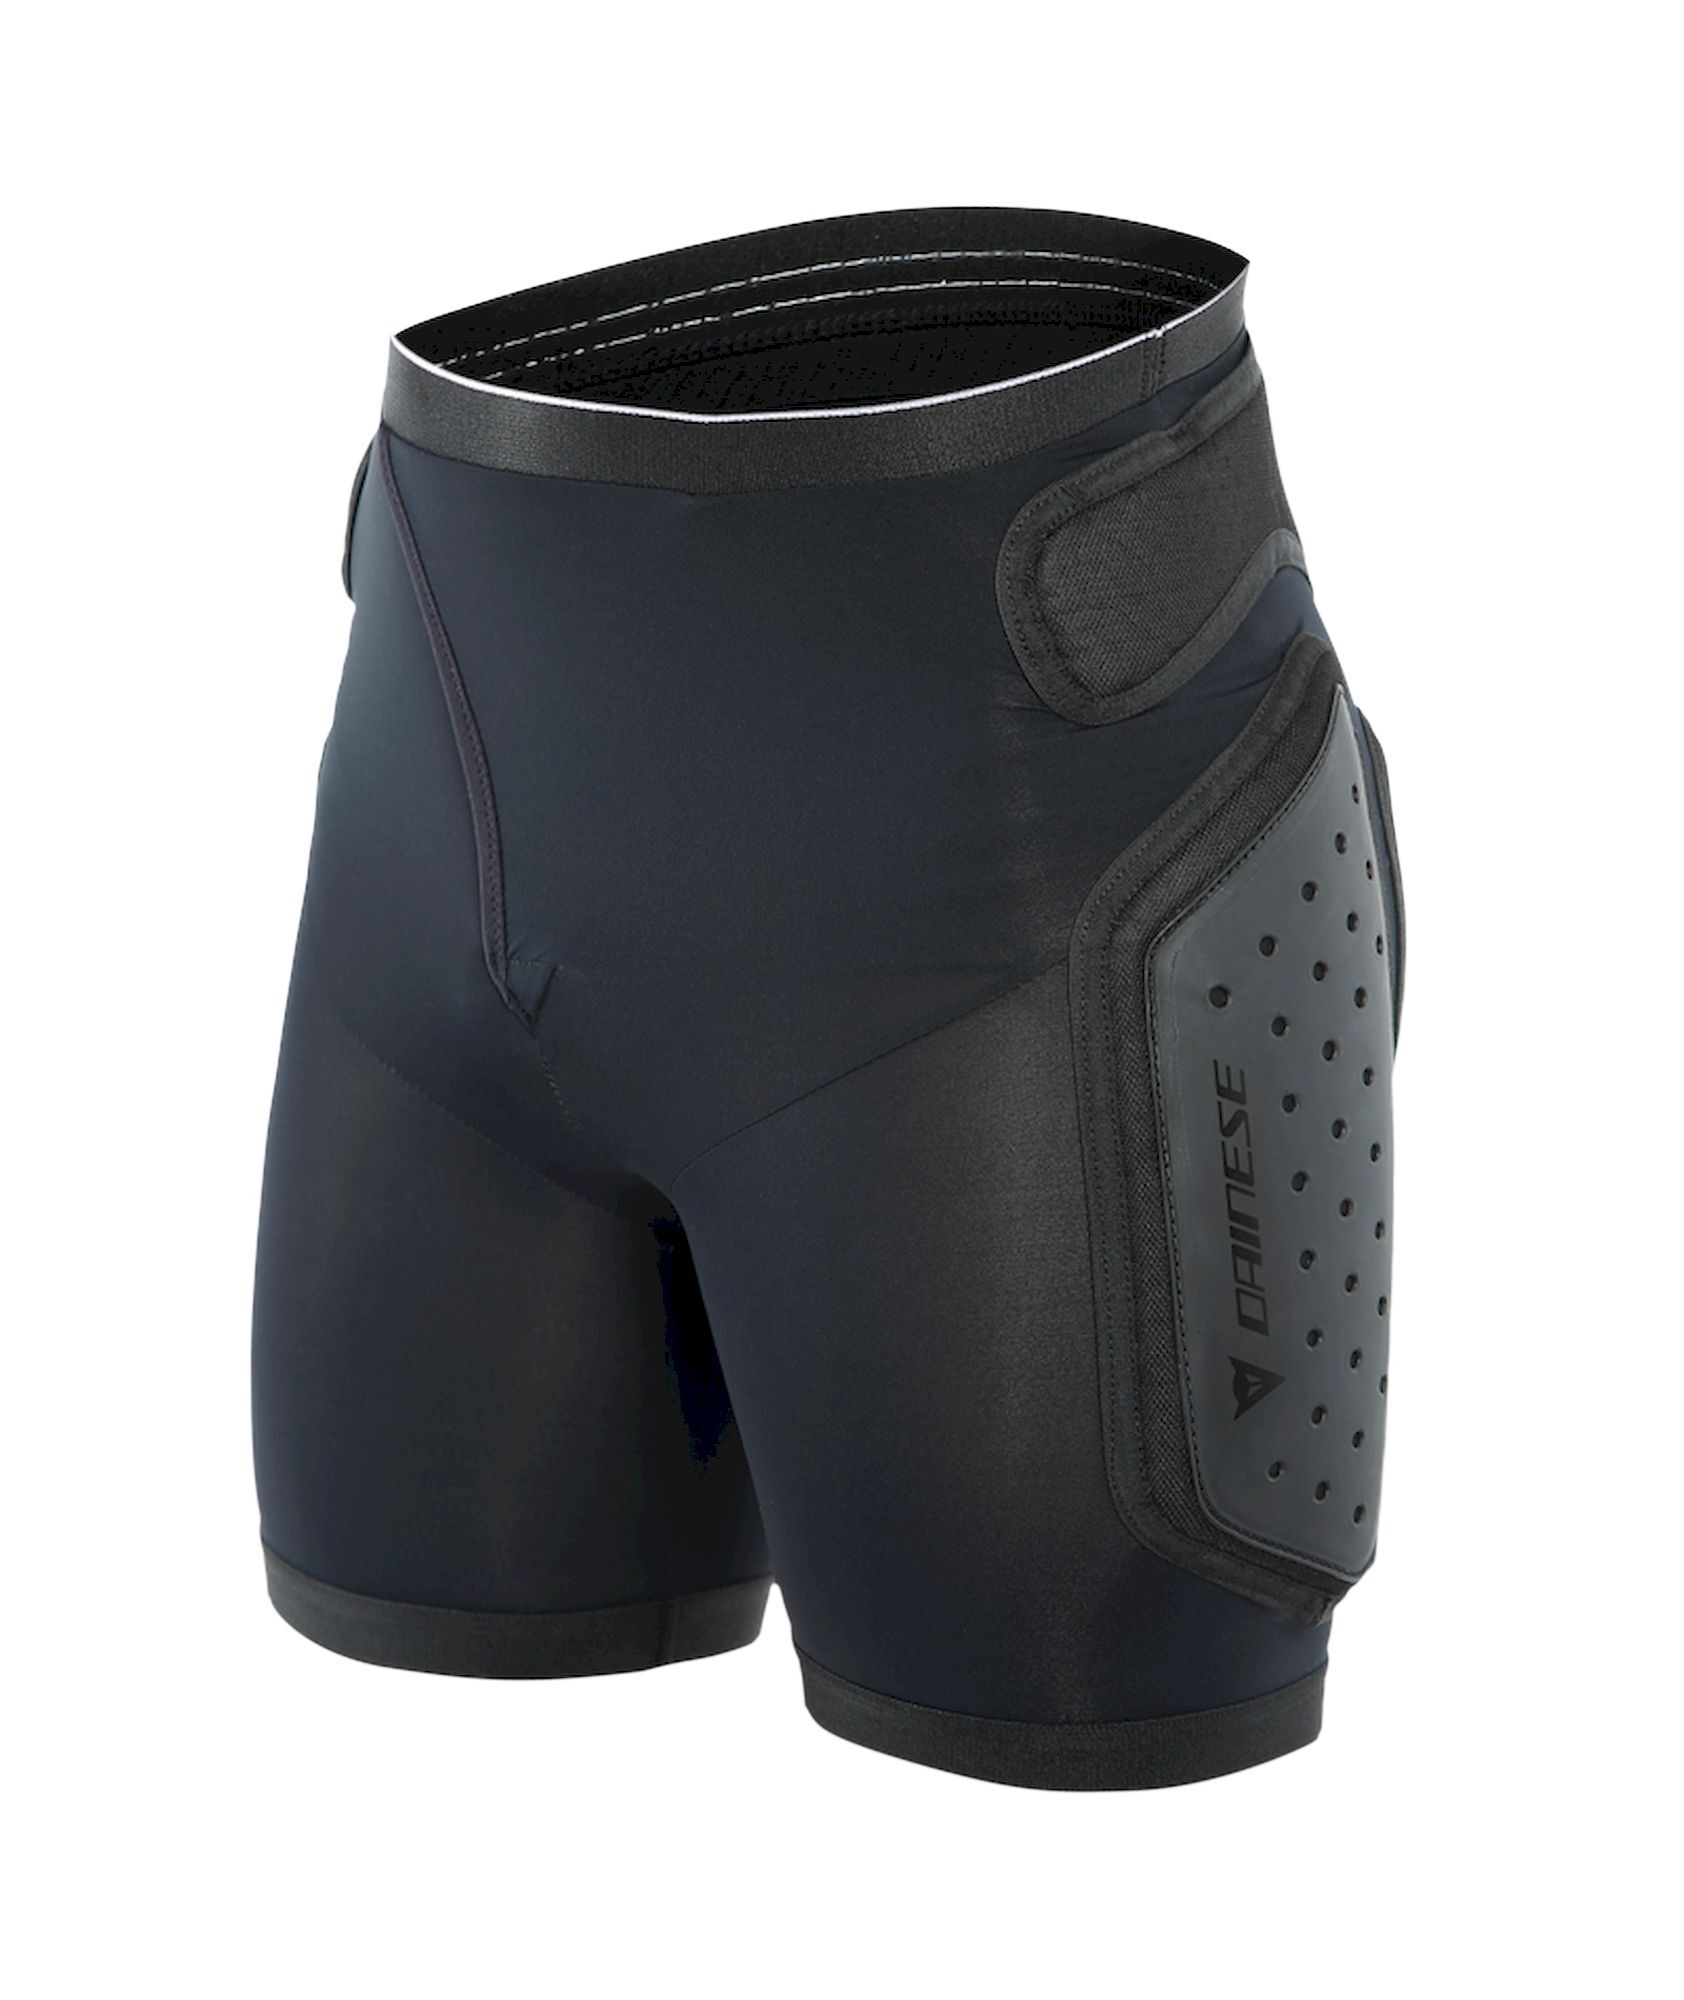 Dainese Action Shorts Evo - Ropa interior ciclismo - Hombre | Hardloop